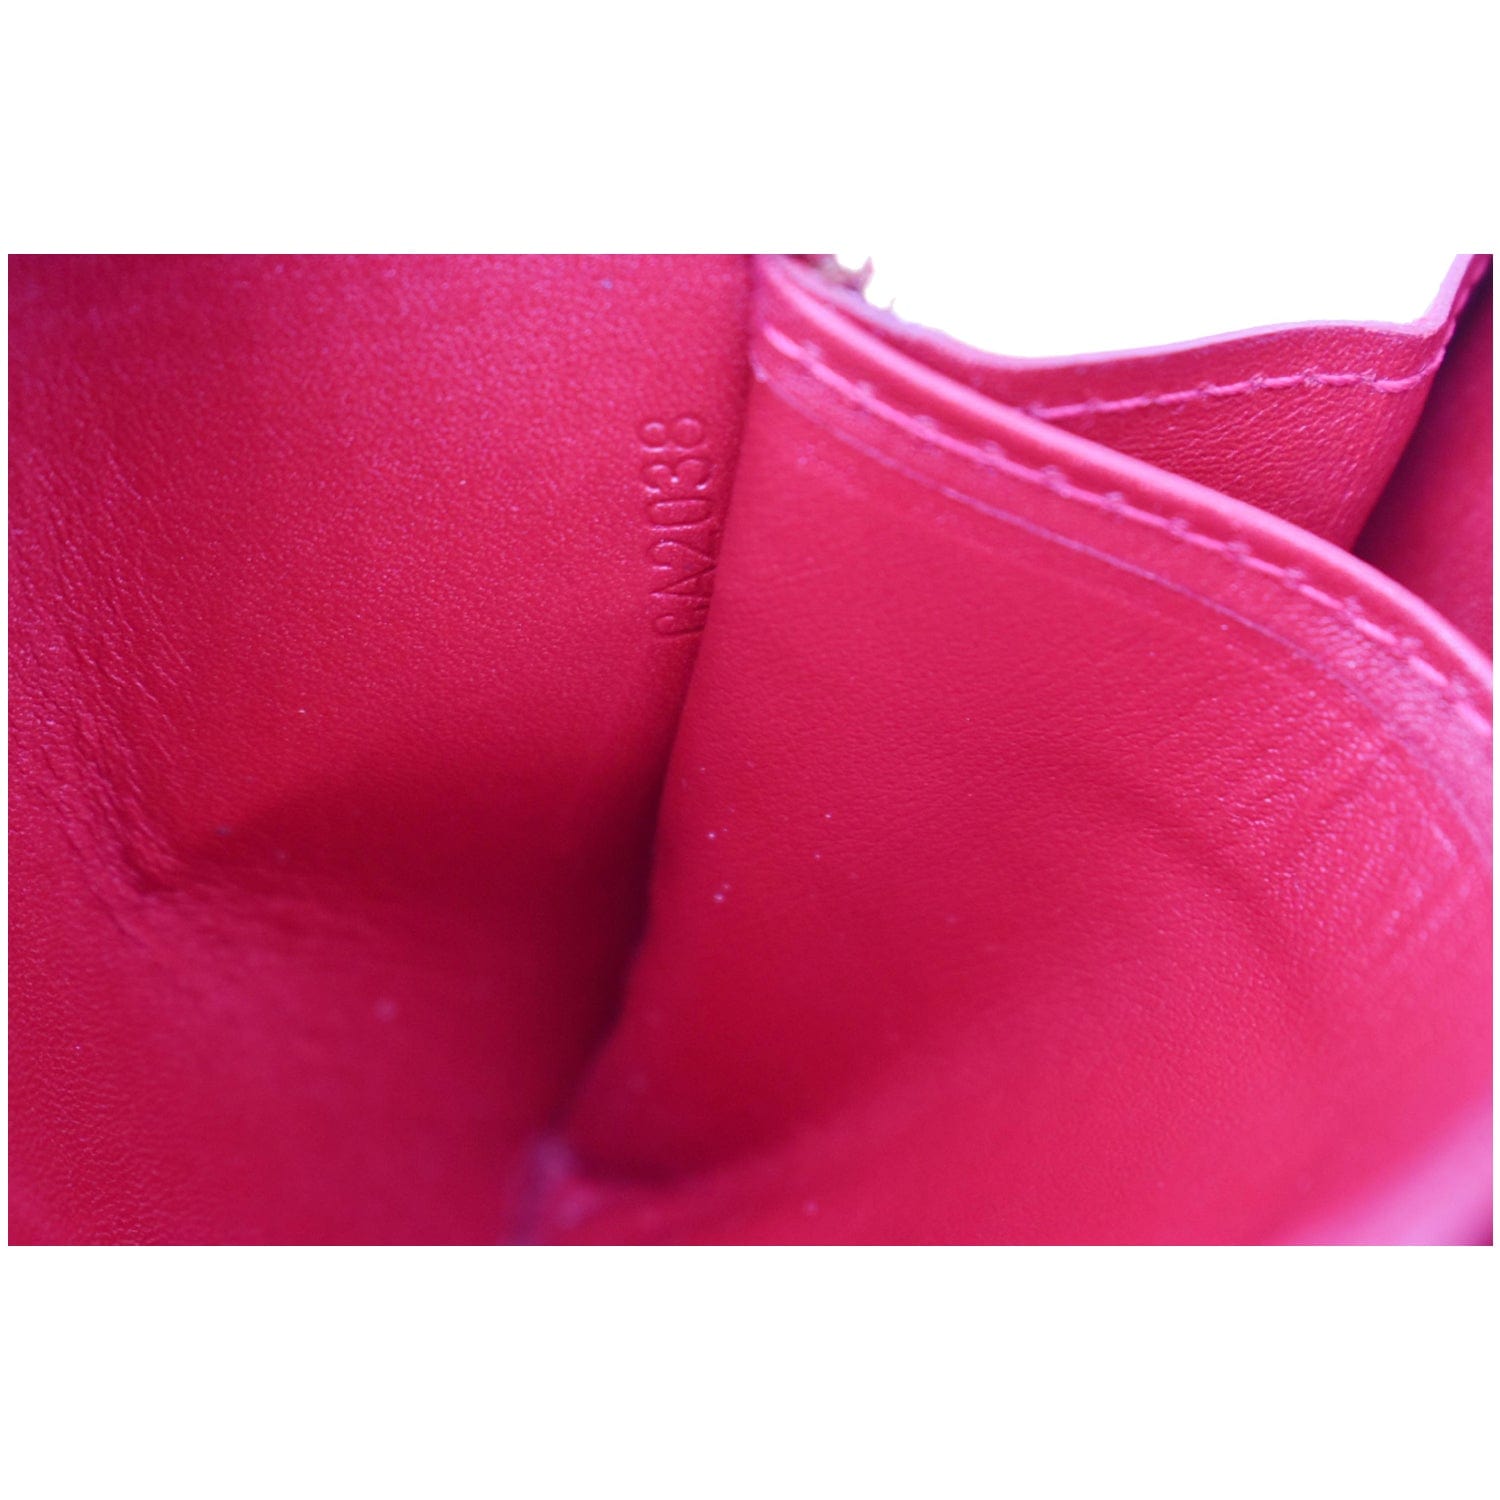 Louis Vuitton Red Vernis Zippy Coin Pouch Leather Patent leather ref.341098  - Joli Closet